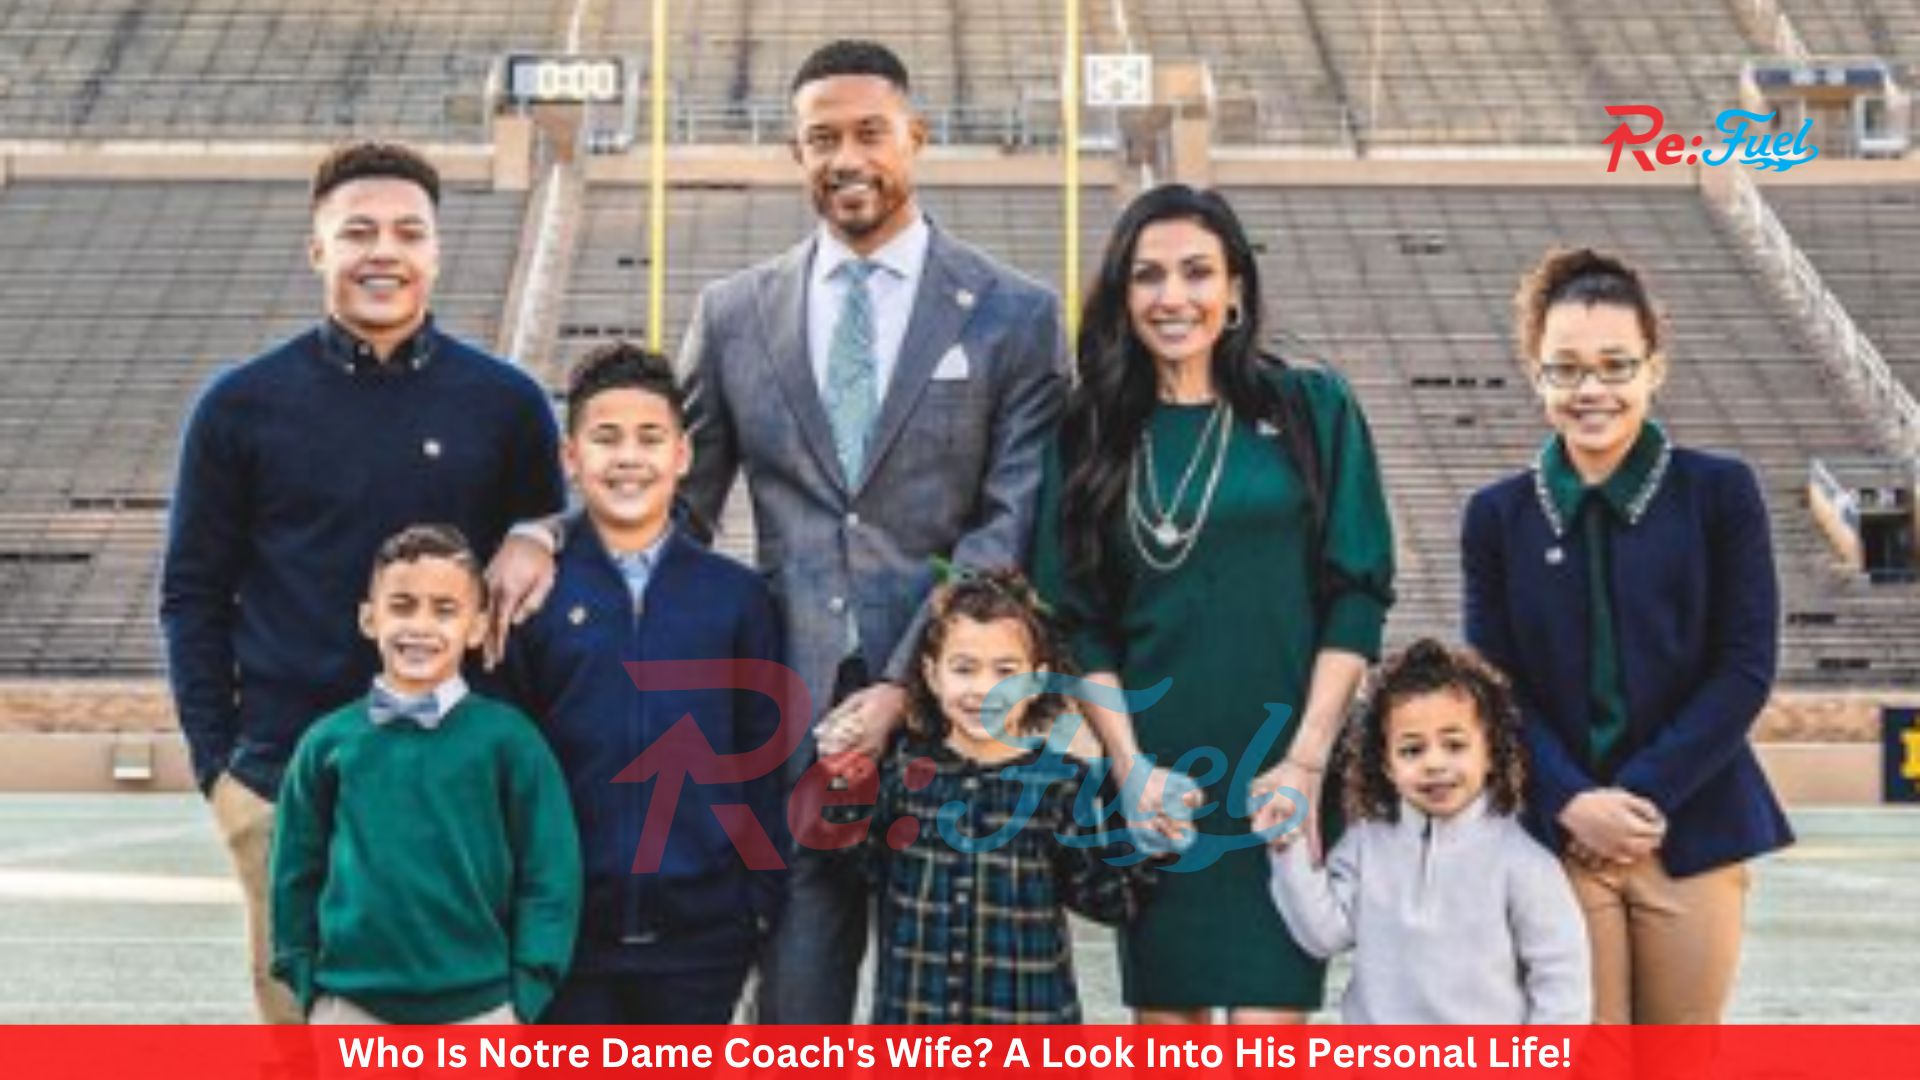 Who Is Notre Dame Coach's Wife? A Look Into His Personal Life!